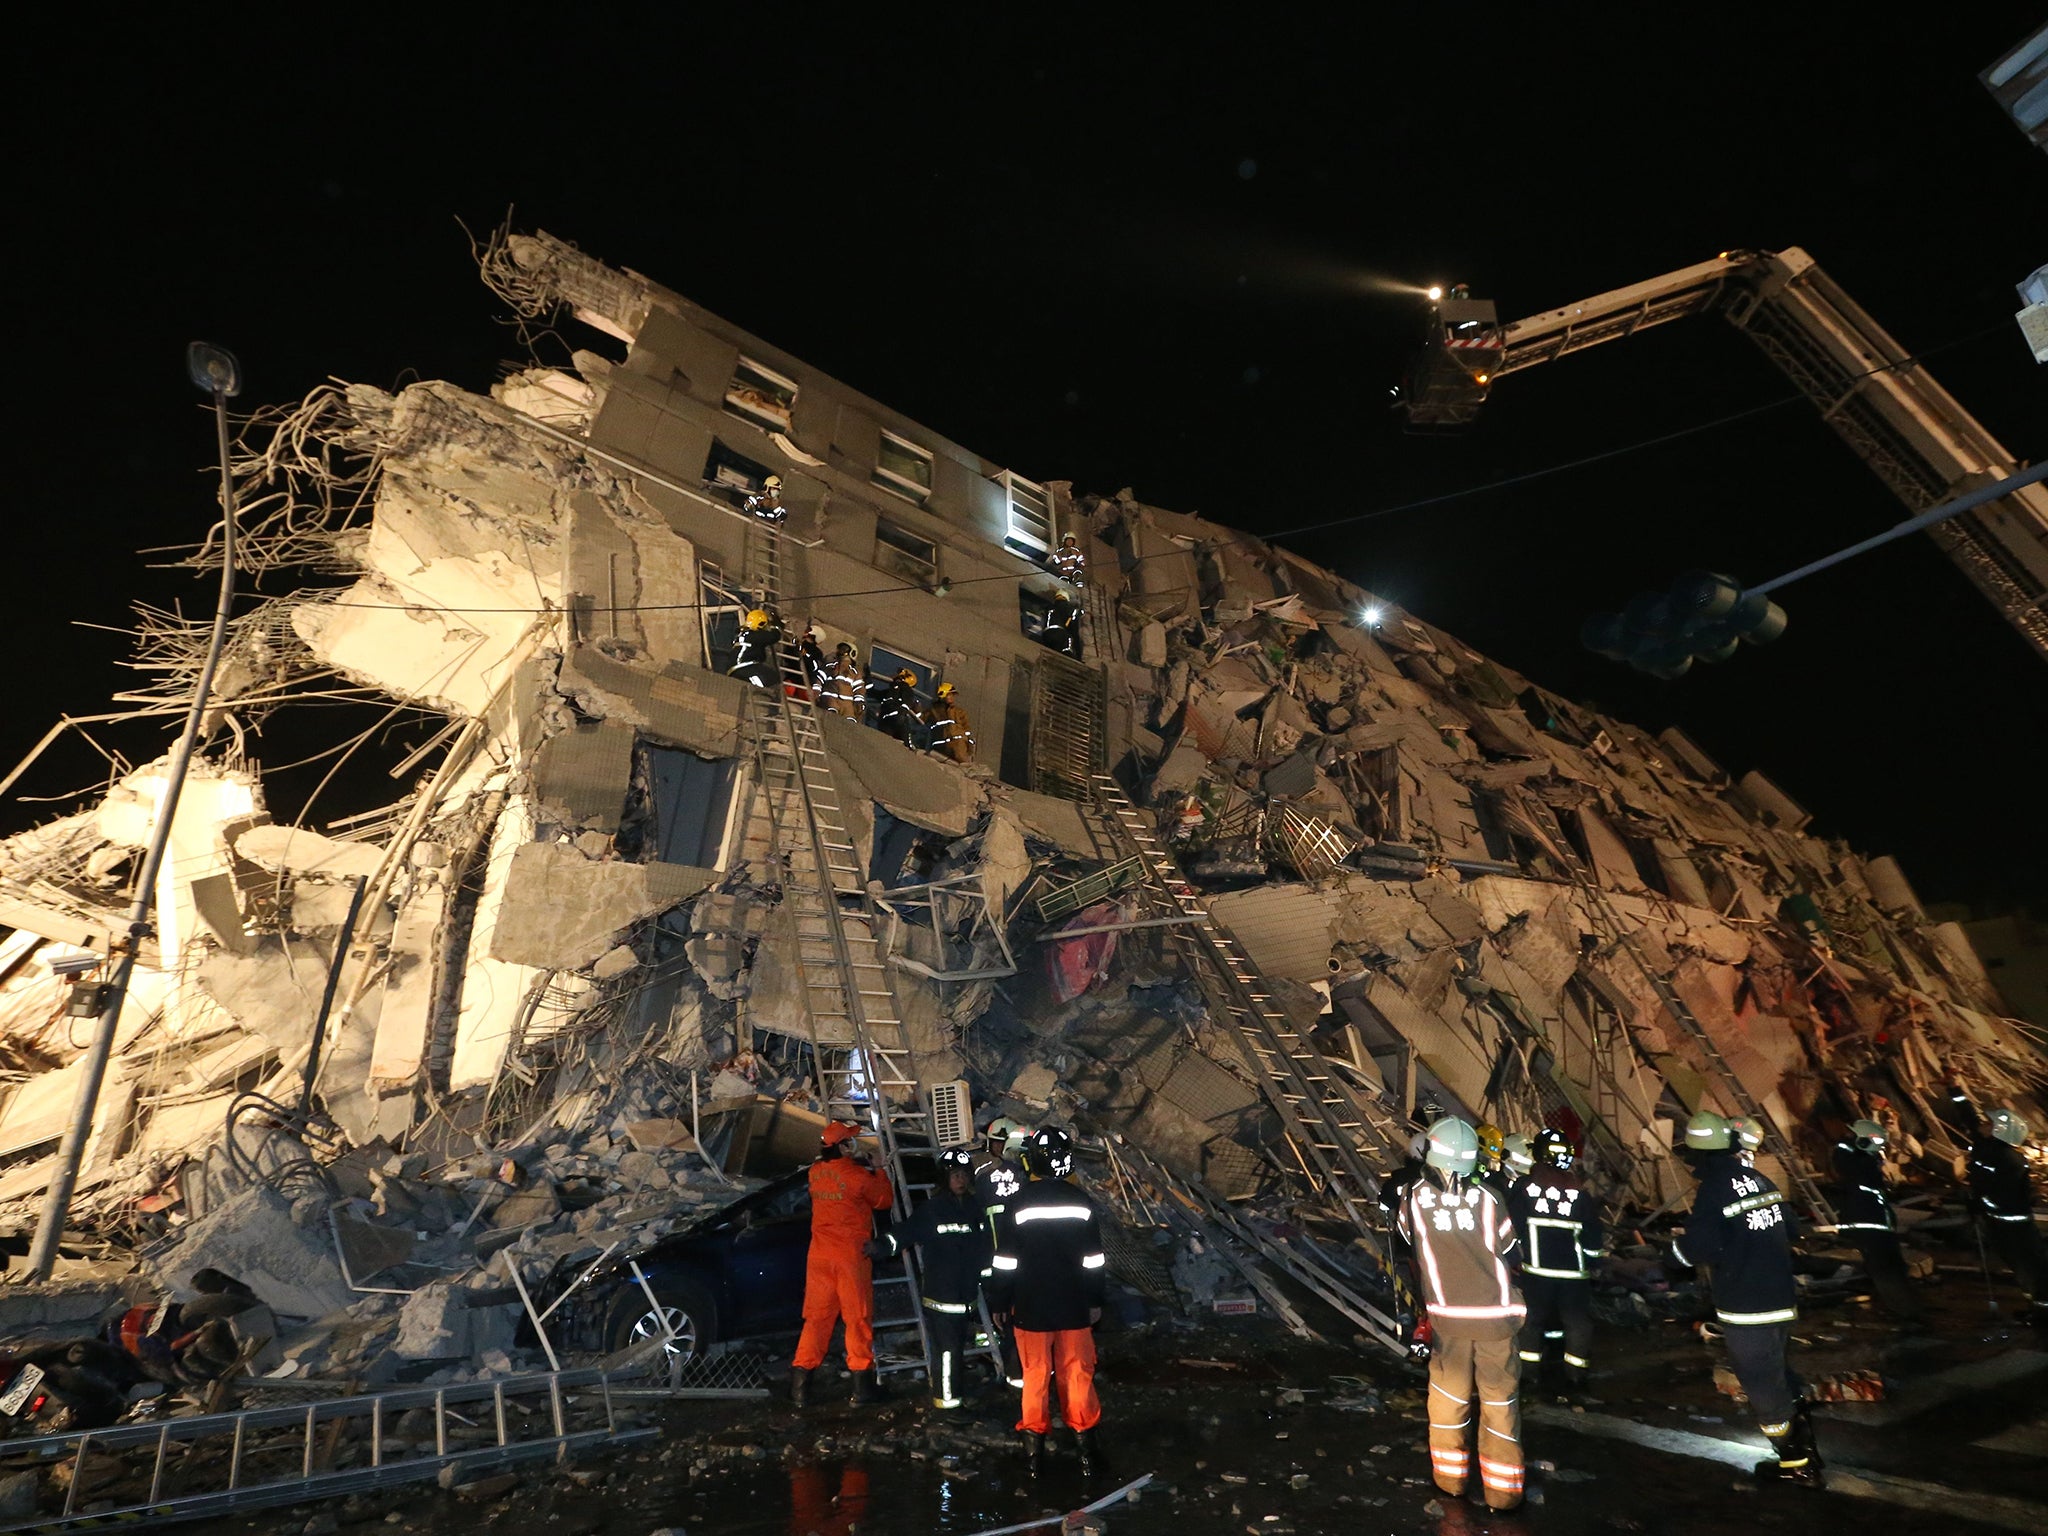 Rescue personnel at the site of collapsed building in Tainin, Taiwan